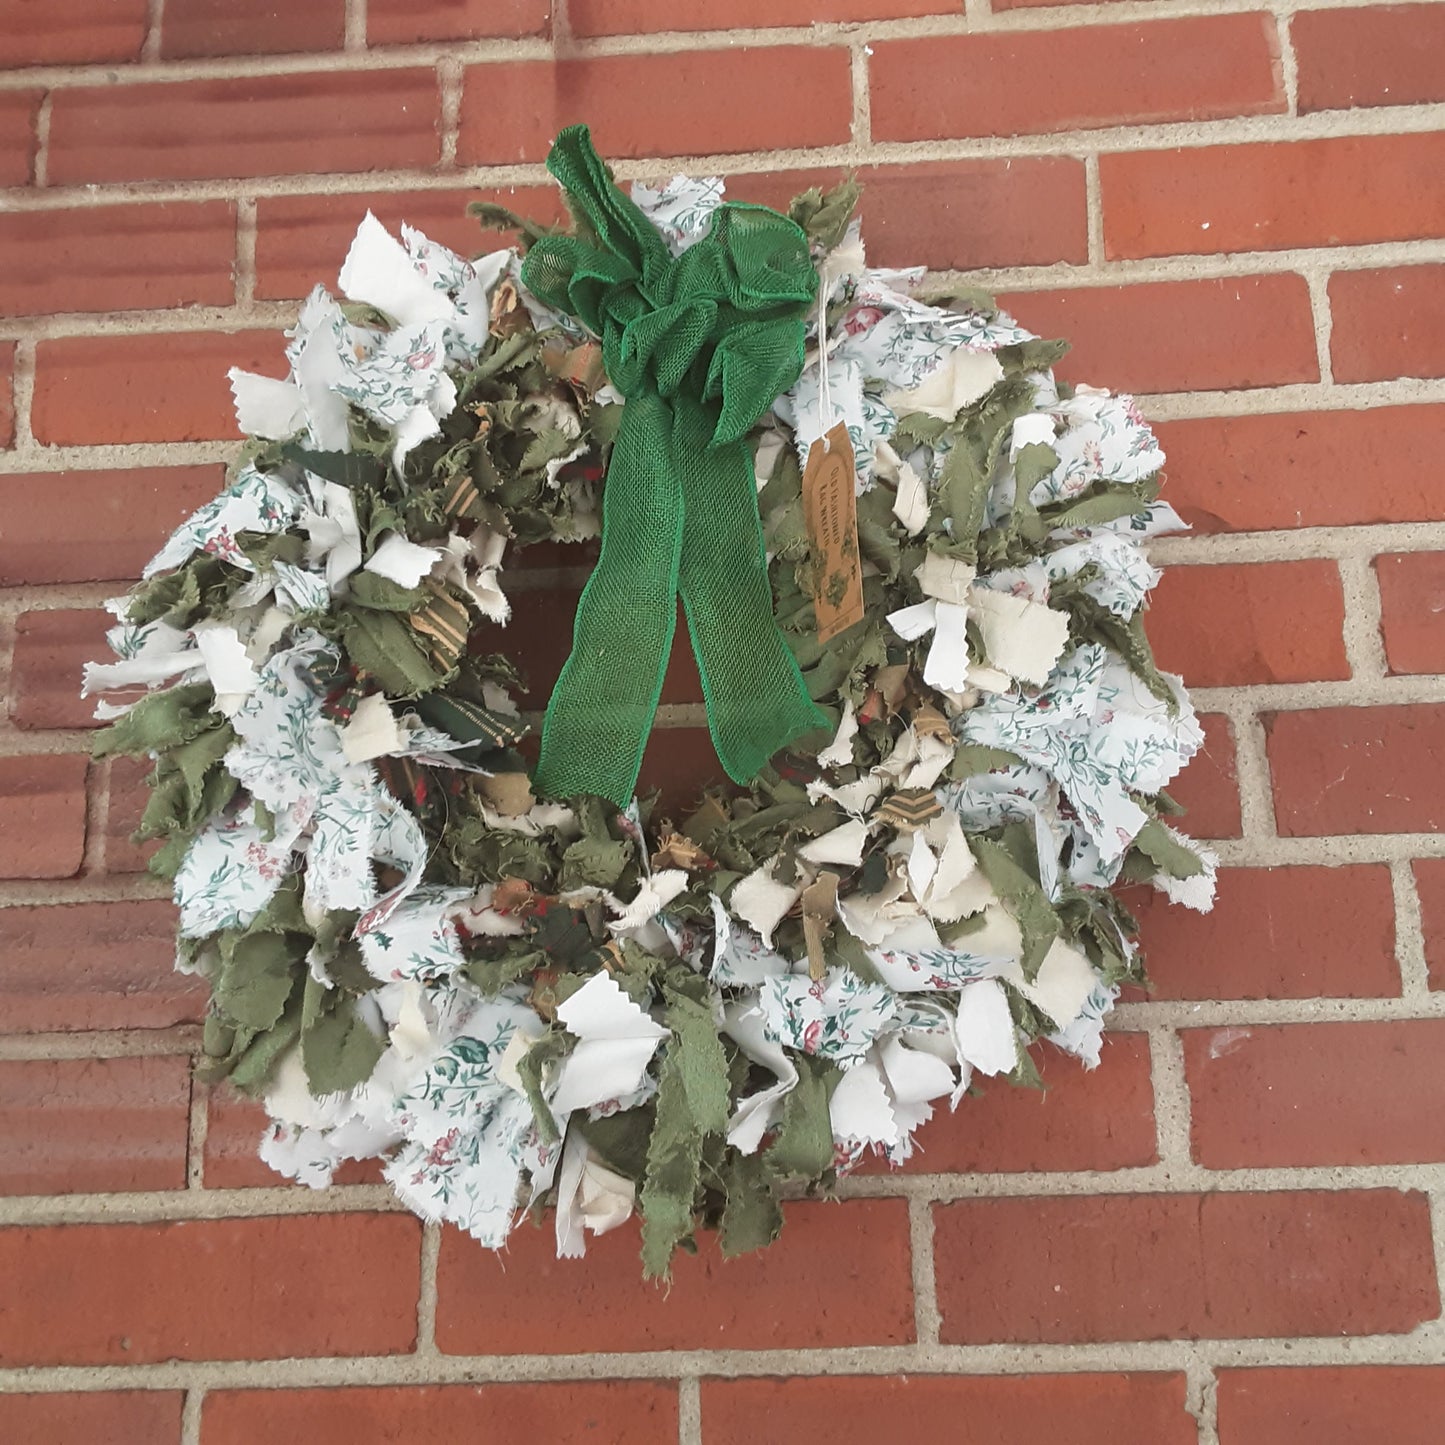 Victorian Christmas Handmade Rag Wreath - Upcycled Fabric in Green Florals